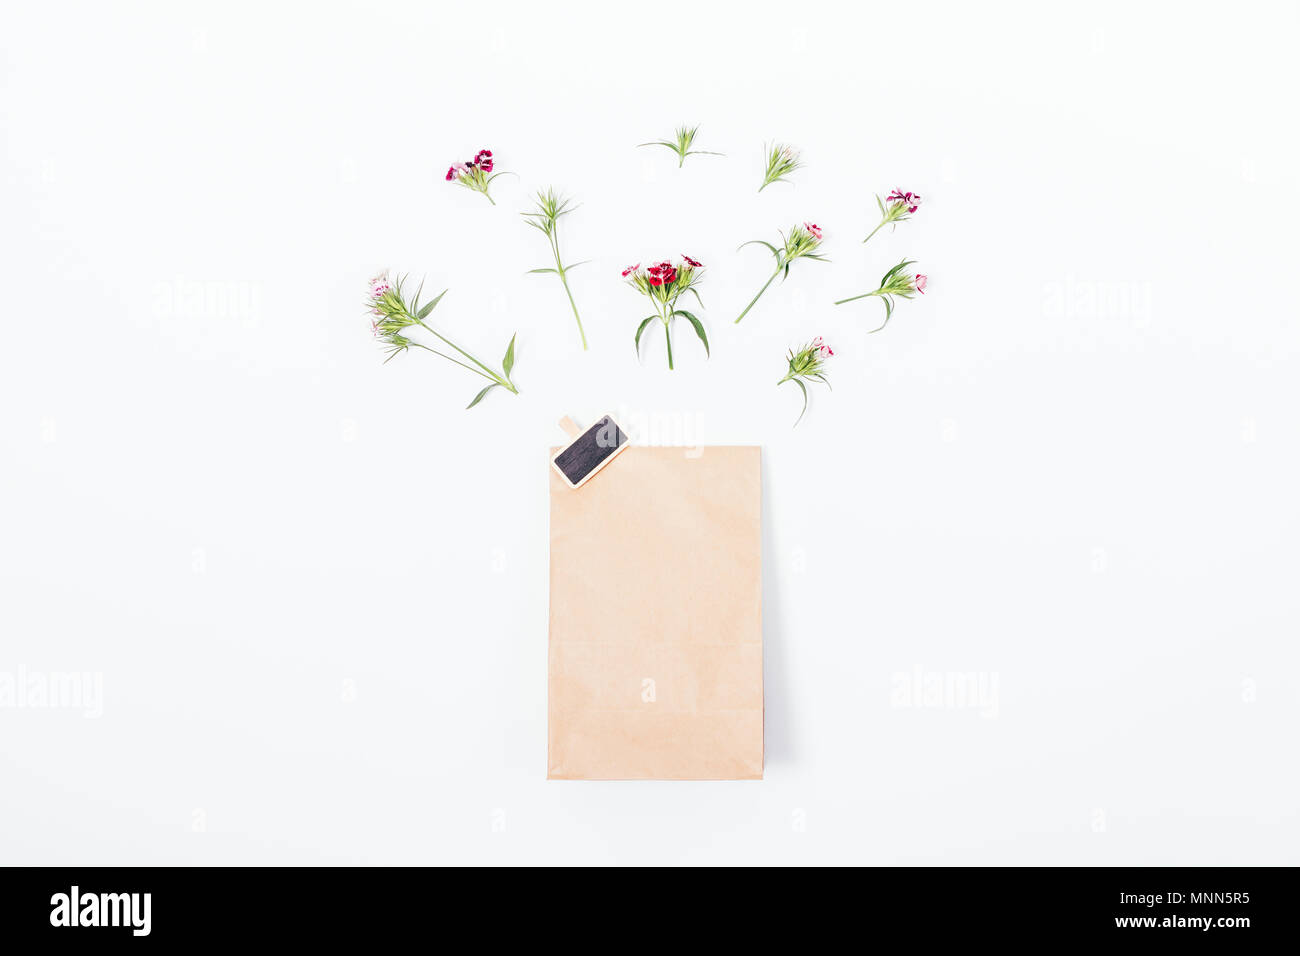 Top view of the paper bag with the badge in the center of a white table. Spring flat lay composition of gift package with little pink flowers above it Stock Photo